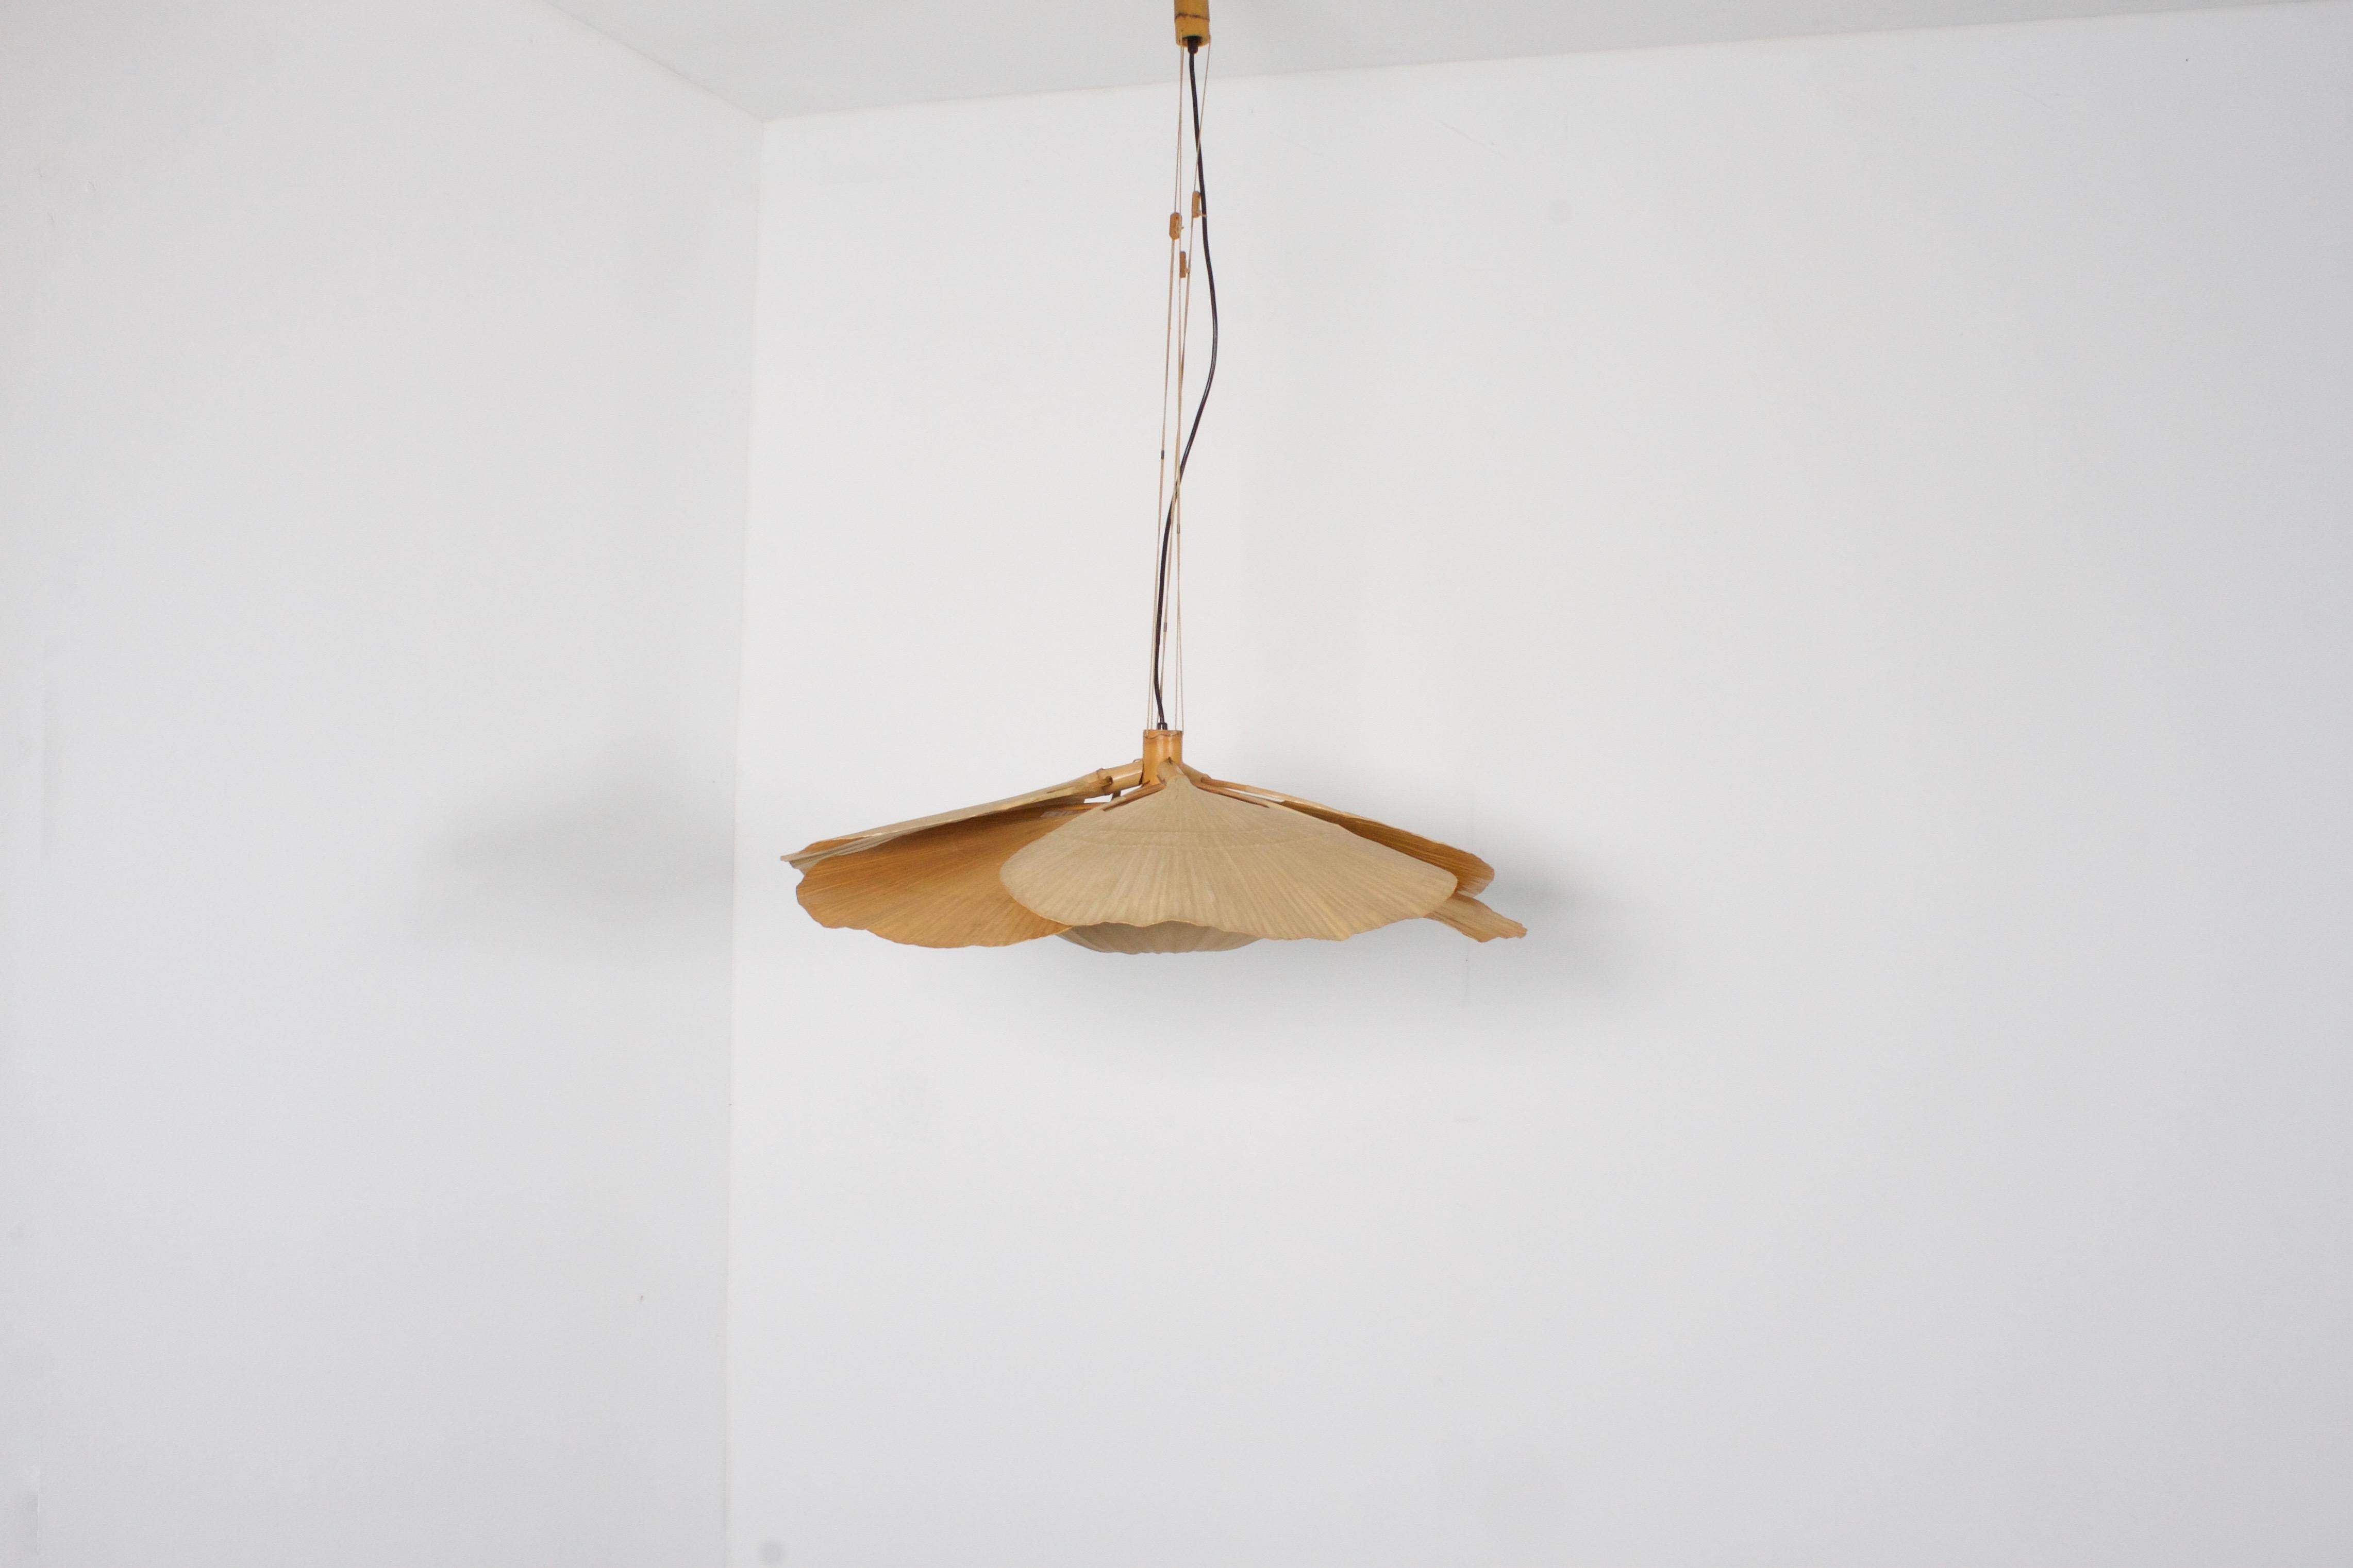 Rare large ‘Uchiwa’ chandelier by Ingo Maurer in very good condition. 

Designed by Ingo Maurer for M design, Germany. 

This lamp is handmade from bamboo, fabric and Japanese rice paper. 

The lamp consists of six large fans hanging from a bamboo